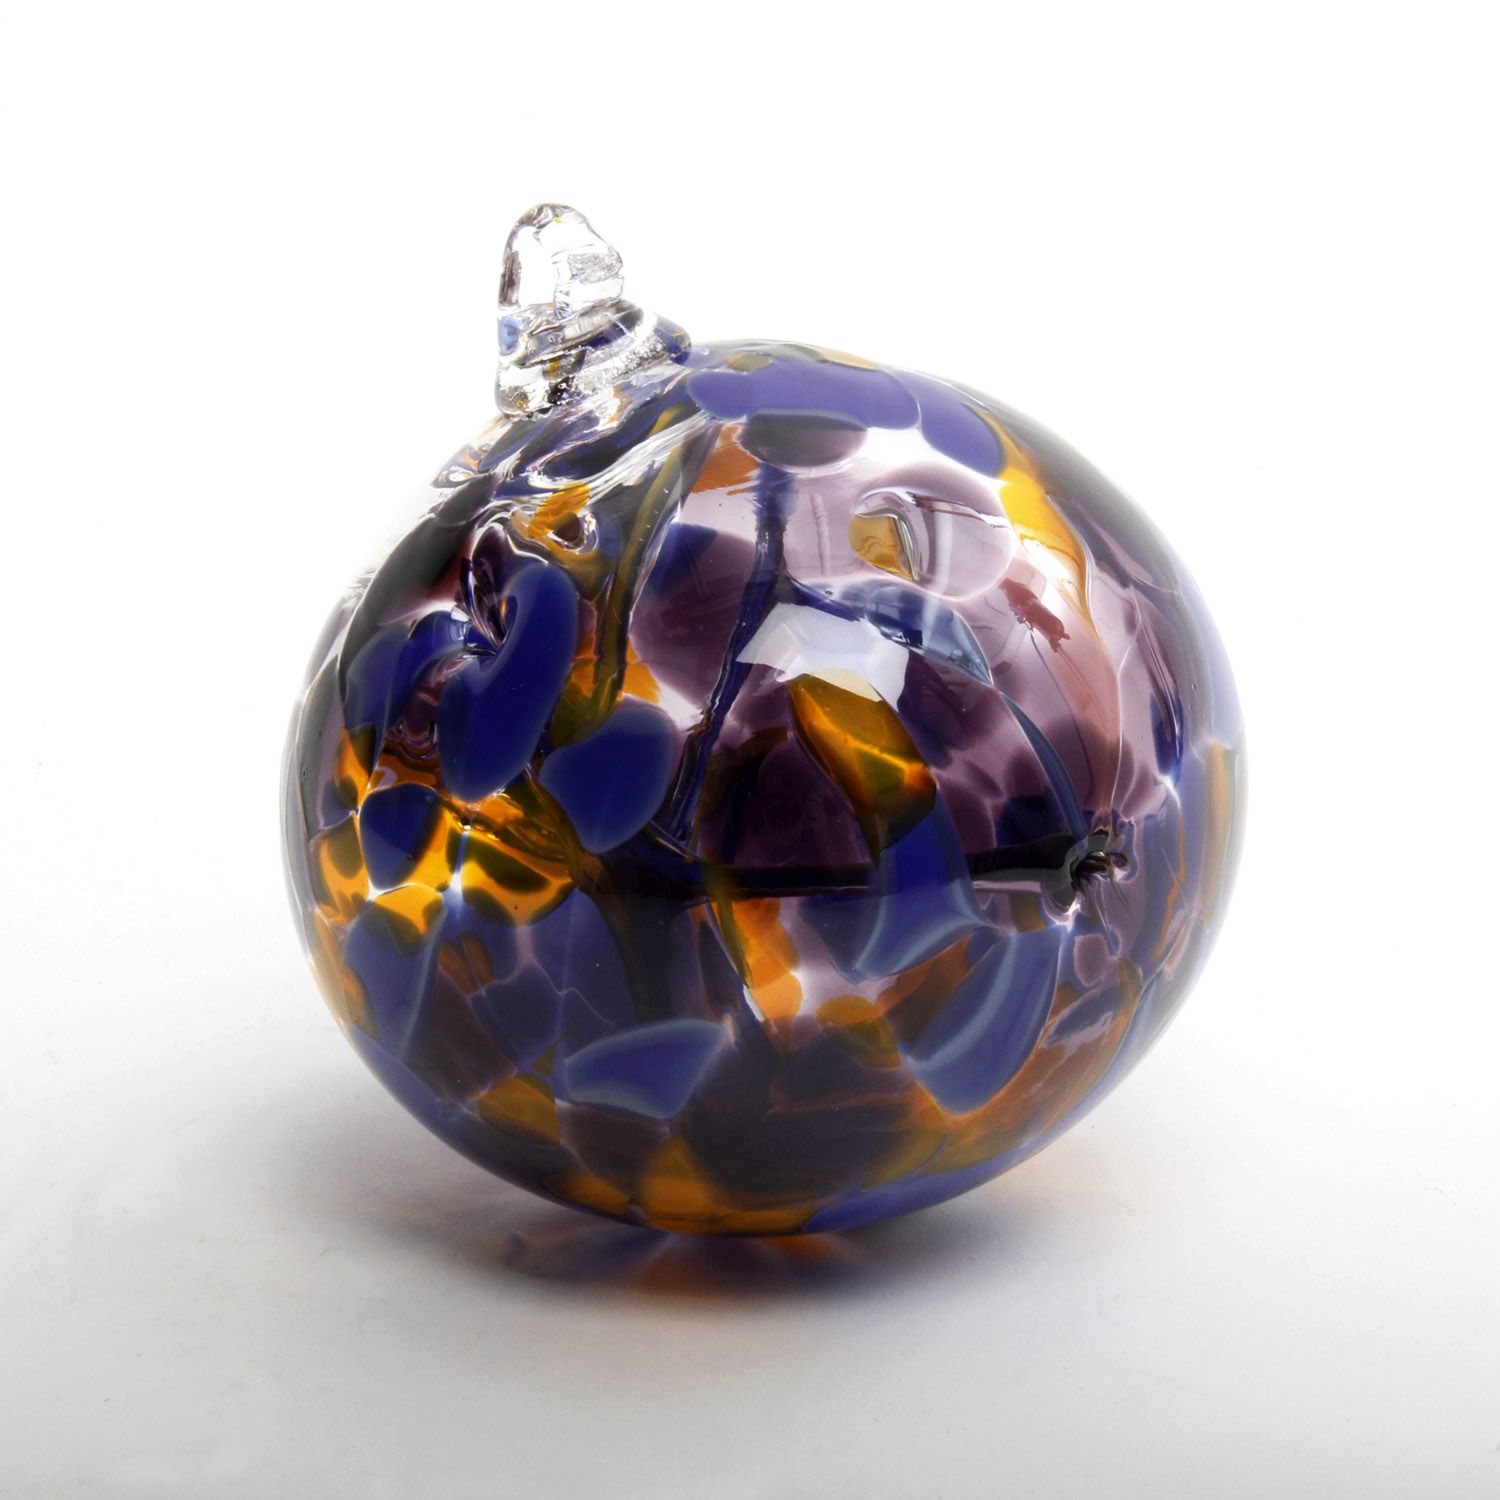 Gordon Boyd: Small Witchball – Starry Night Product Image 4 of 4